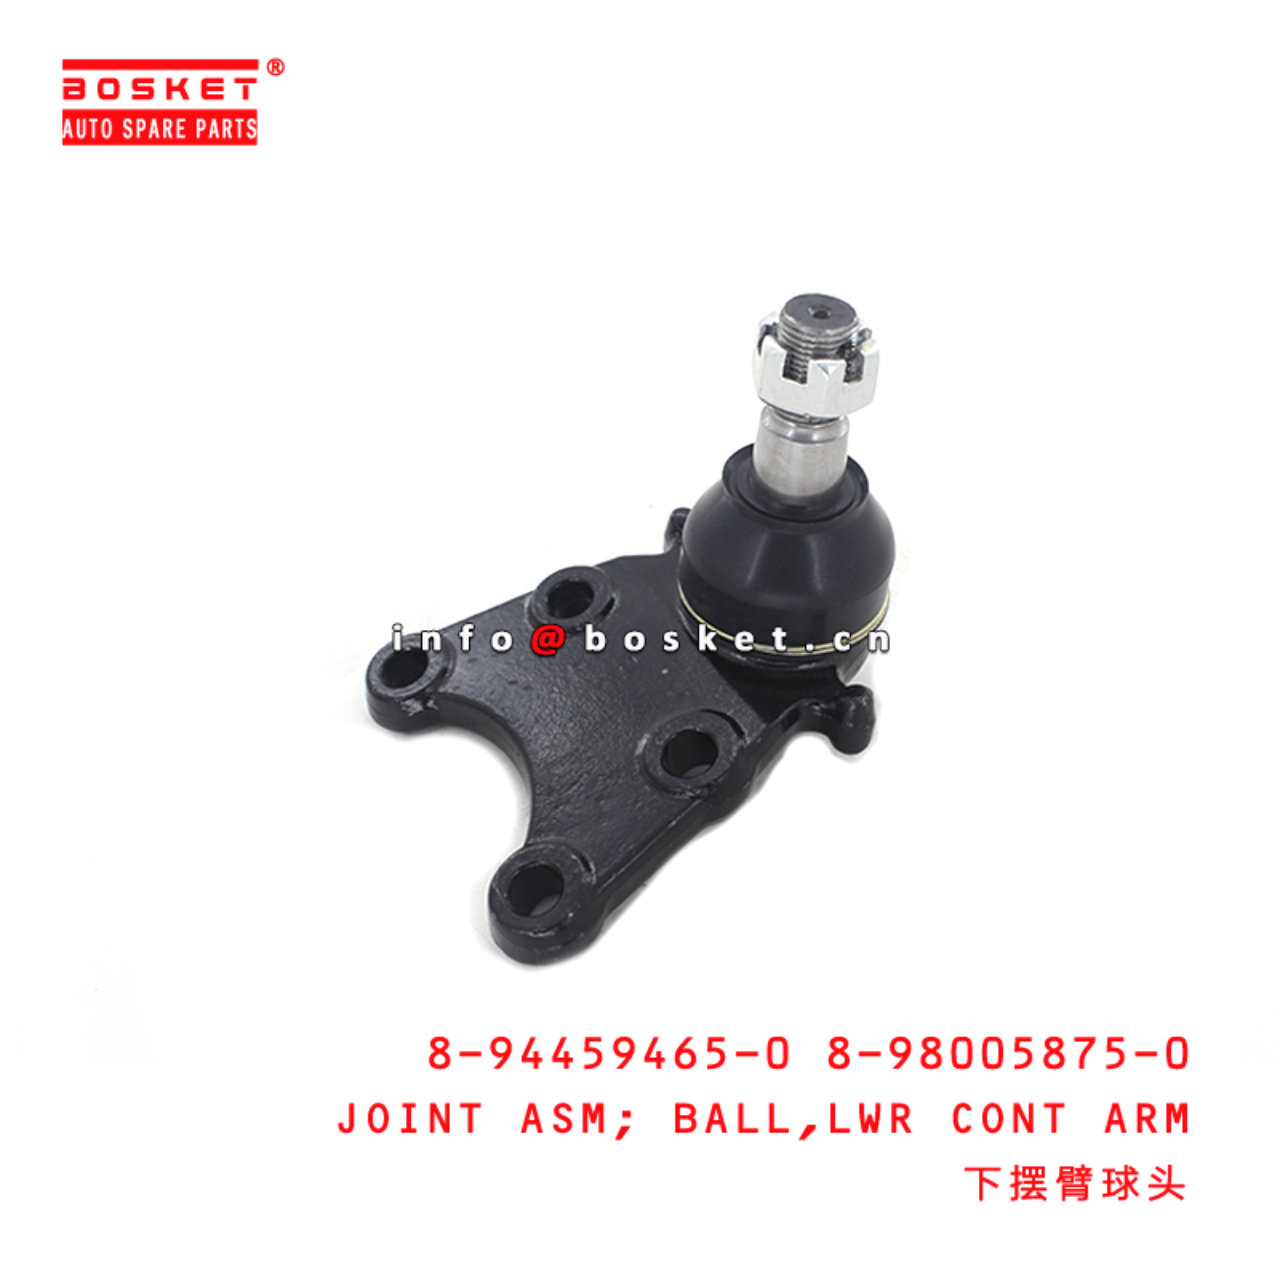 8-94459465-0 8-98005875-0 Lower Control Arm Ball Joint Assembly 8944594650 8980058750 Suitable for I